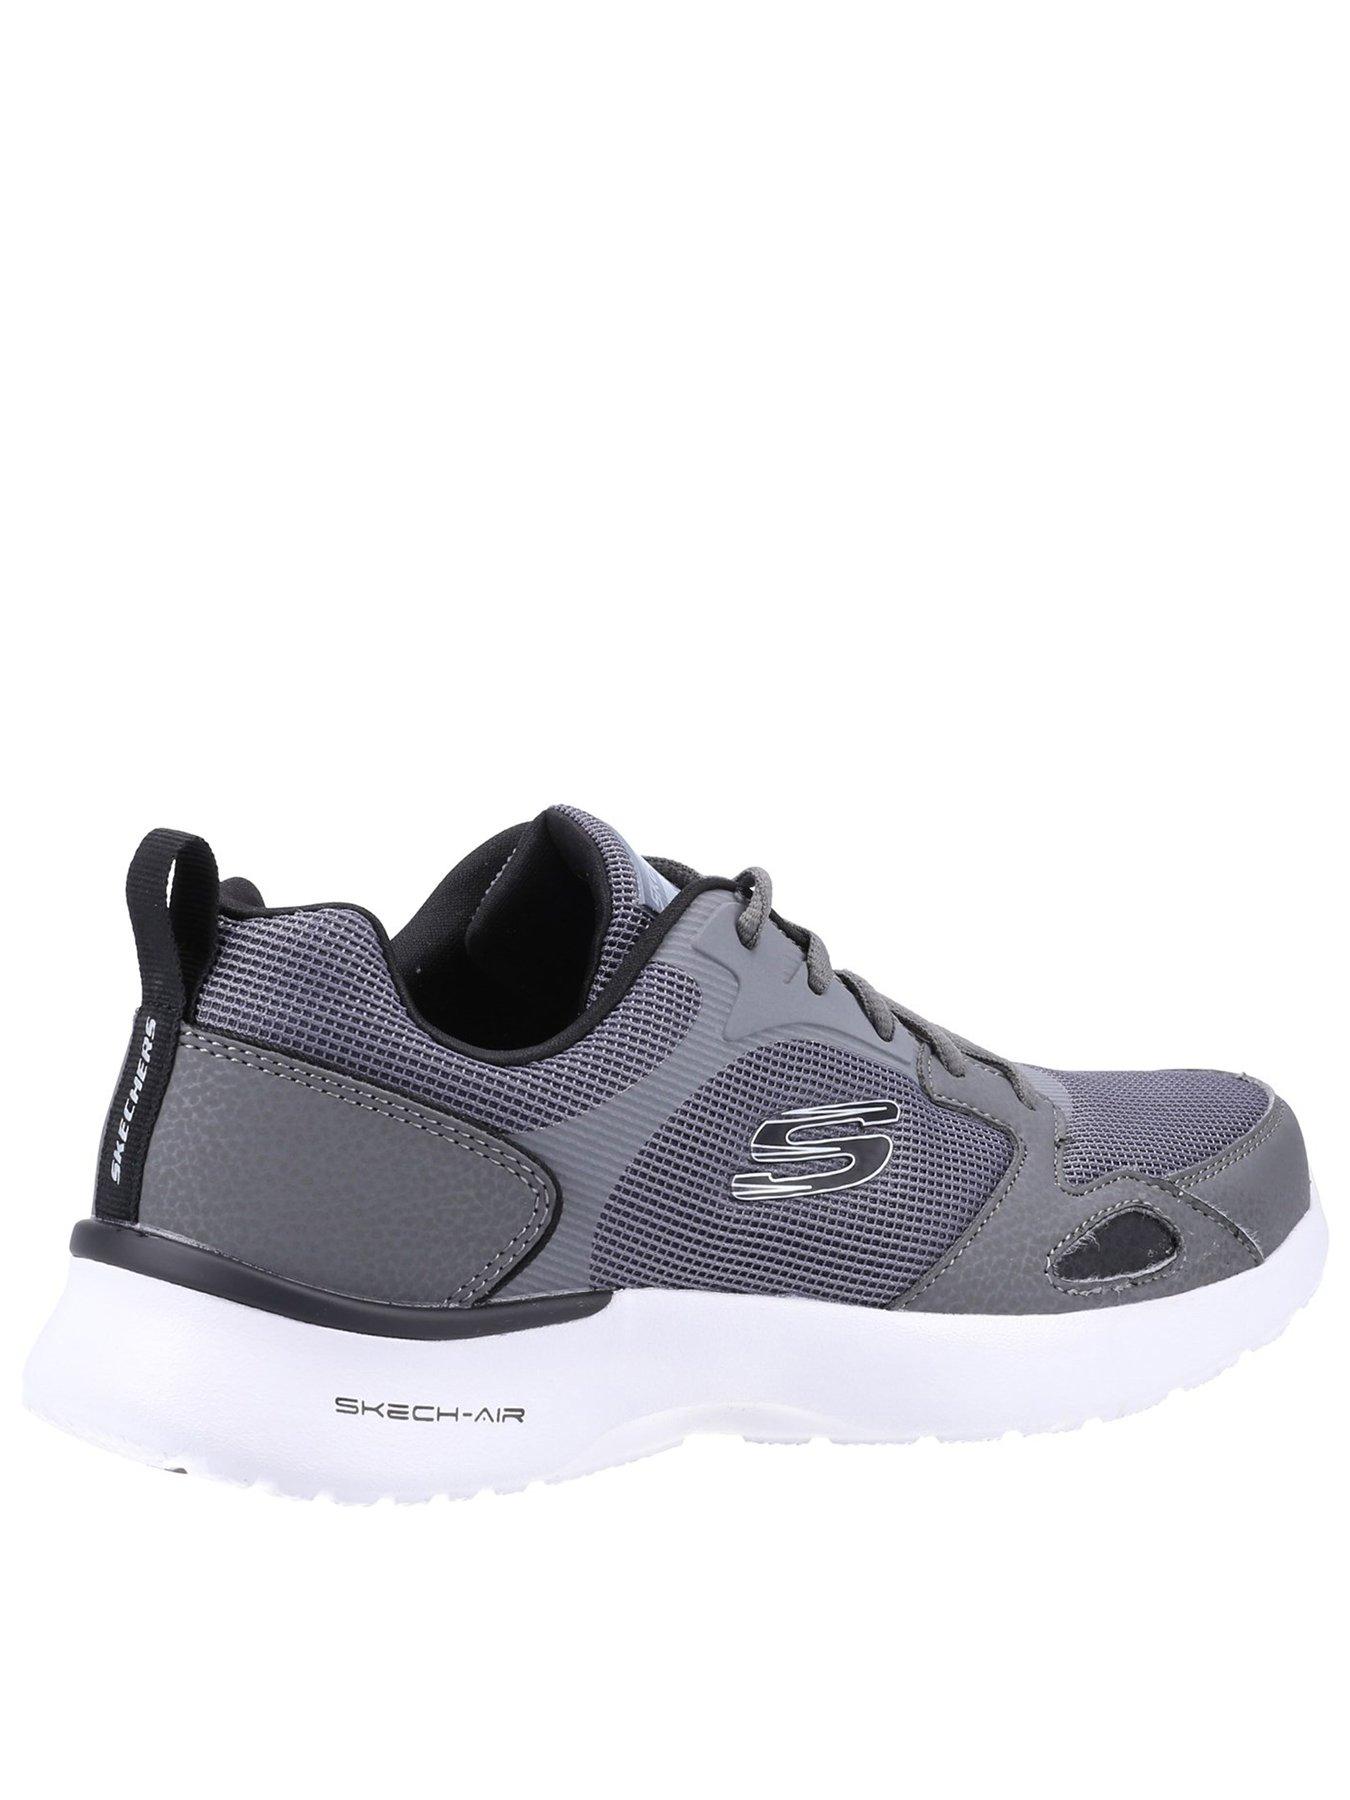 Skechers Air Dynamite Trainer - Charcoal | littlewoods.com